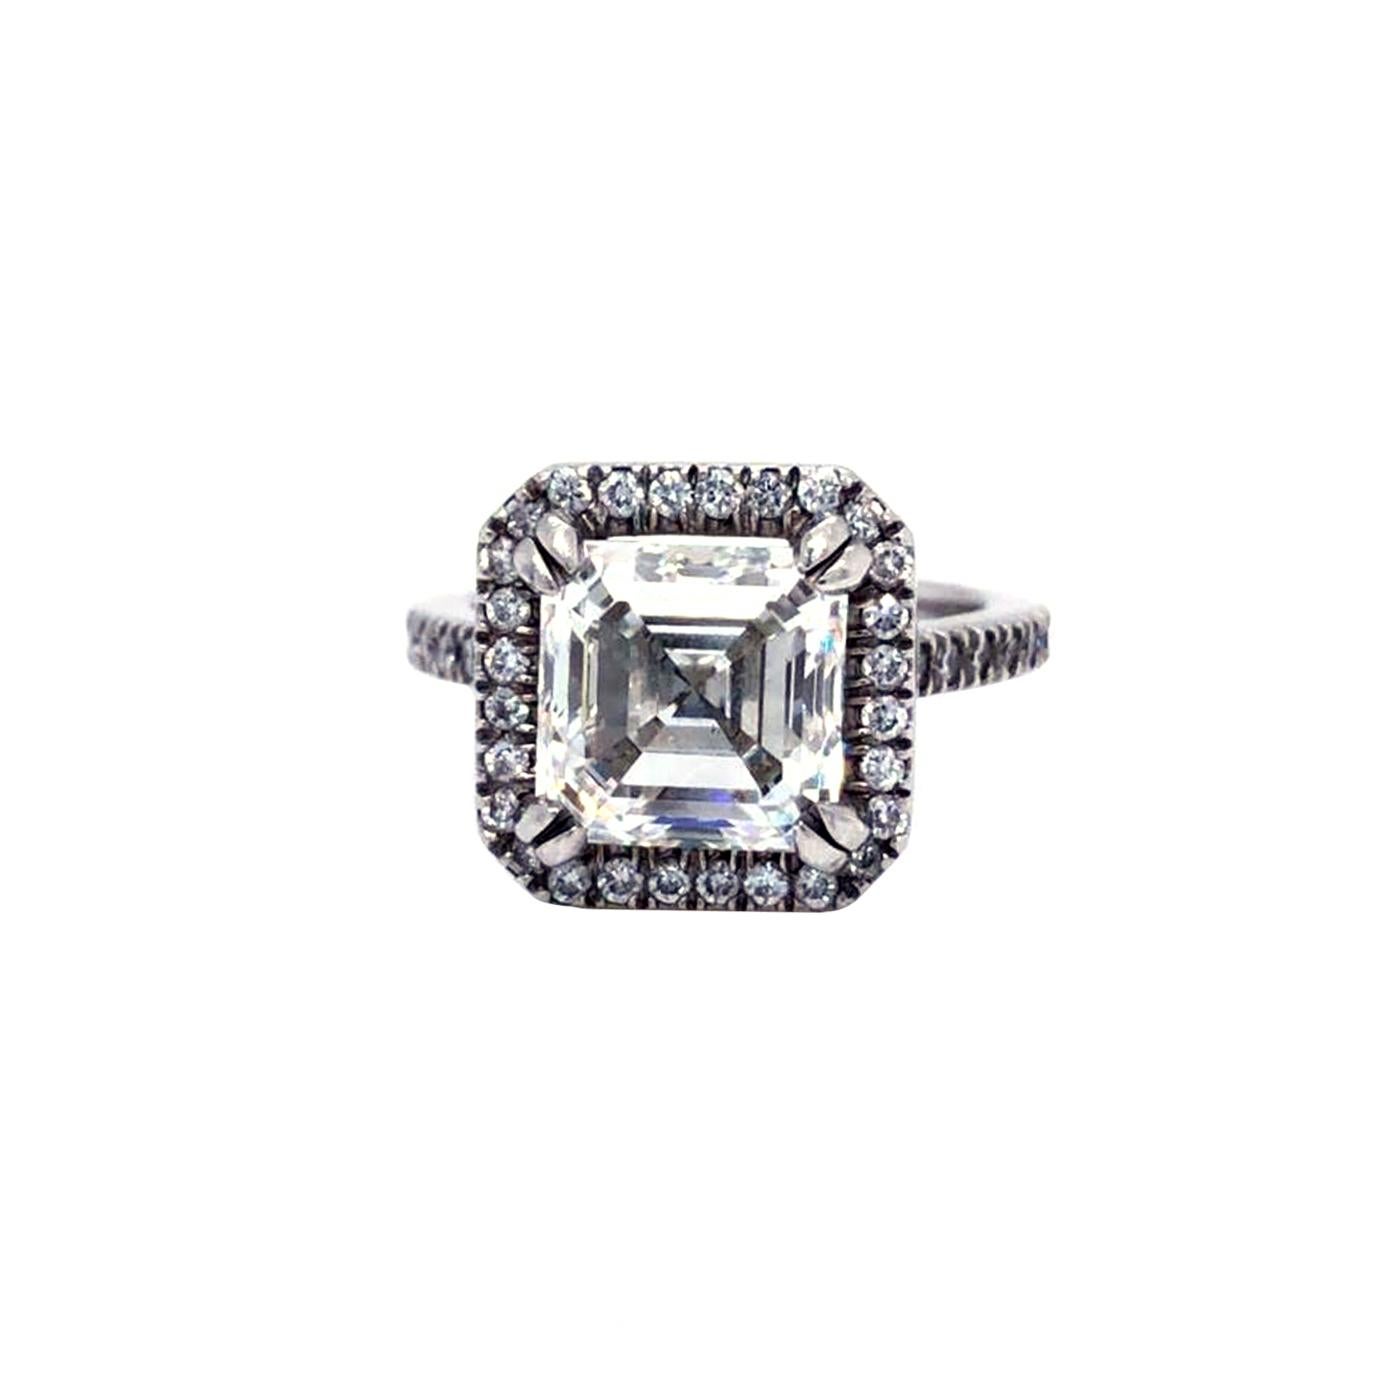 This Gorgeous Diamond ring is accompanied by a GIA Certificate Graded report certifying that the 4.02ct Asscher cut Natural VS1 clarity Diamond Ring is made in Platinum, This ring will be perfect for your special one, This fantastic piece is